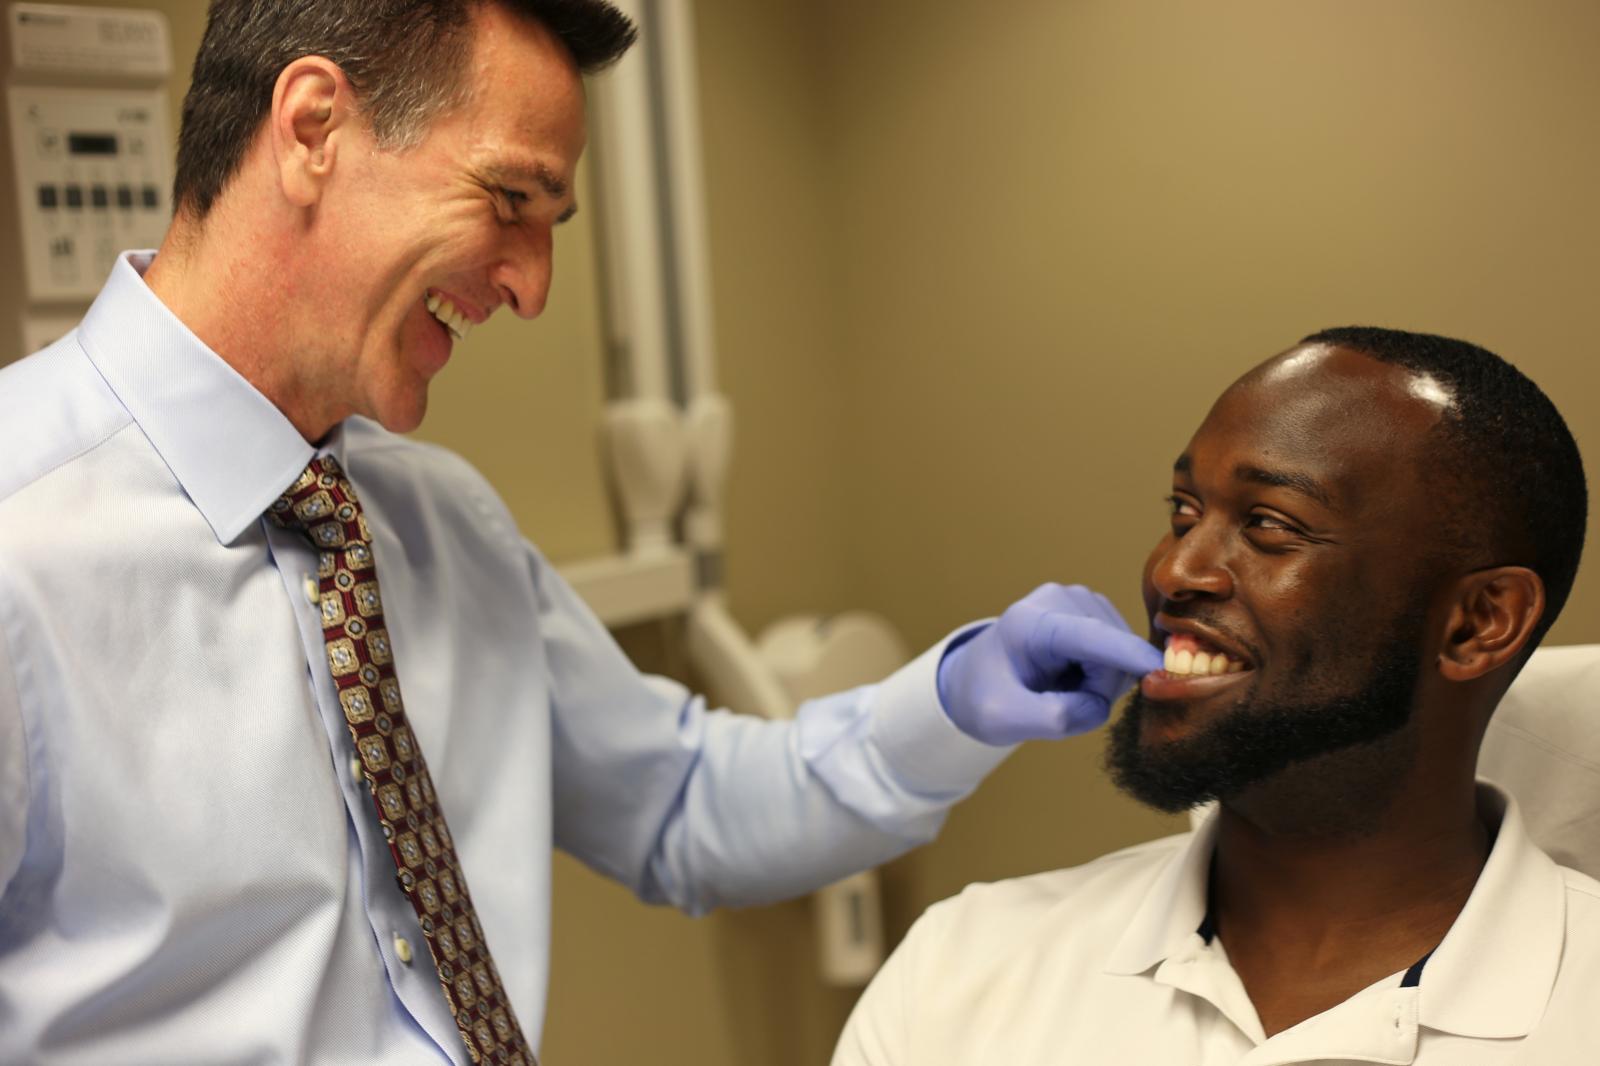 Man getting an orthodontic consultation